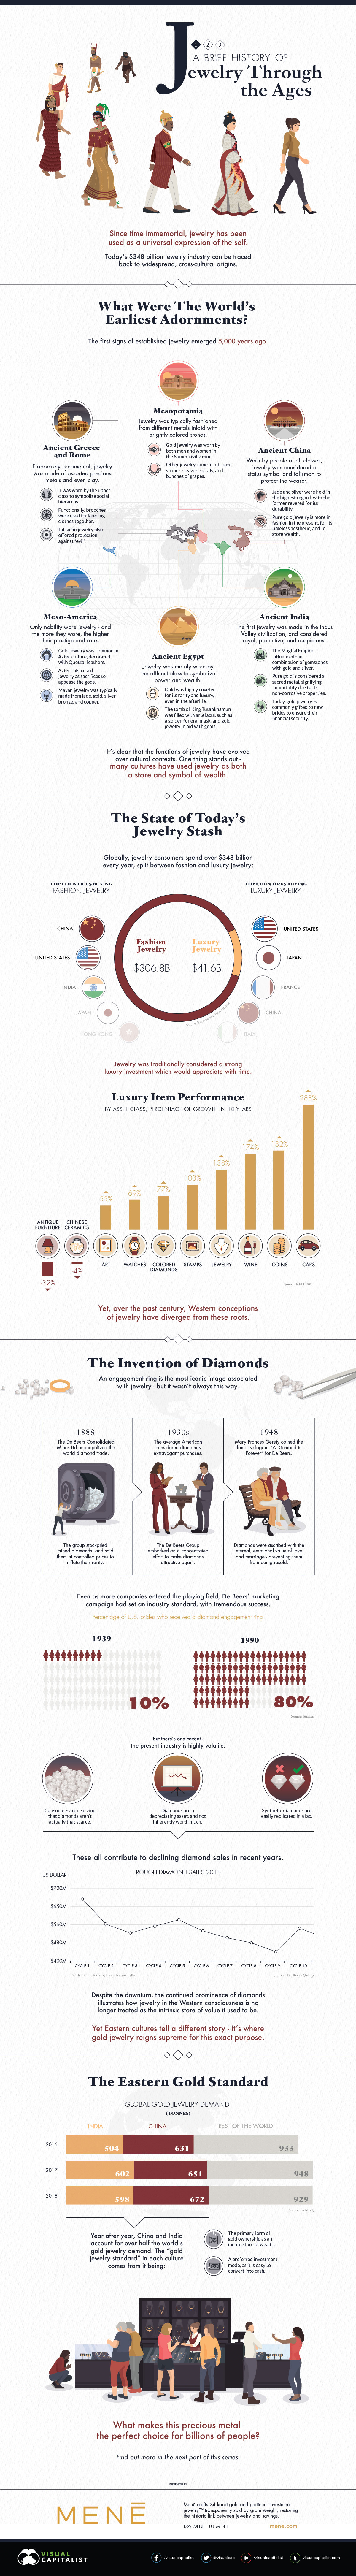 Infographic: A Brief History of Jewelry Through the Ages